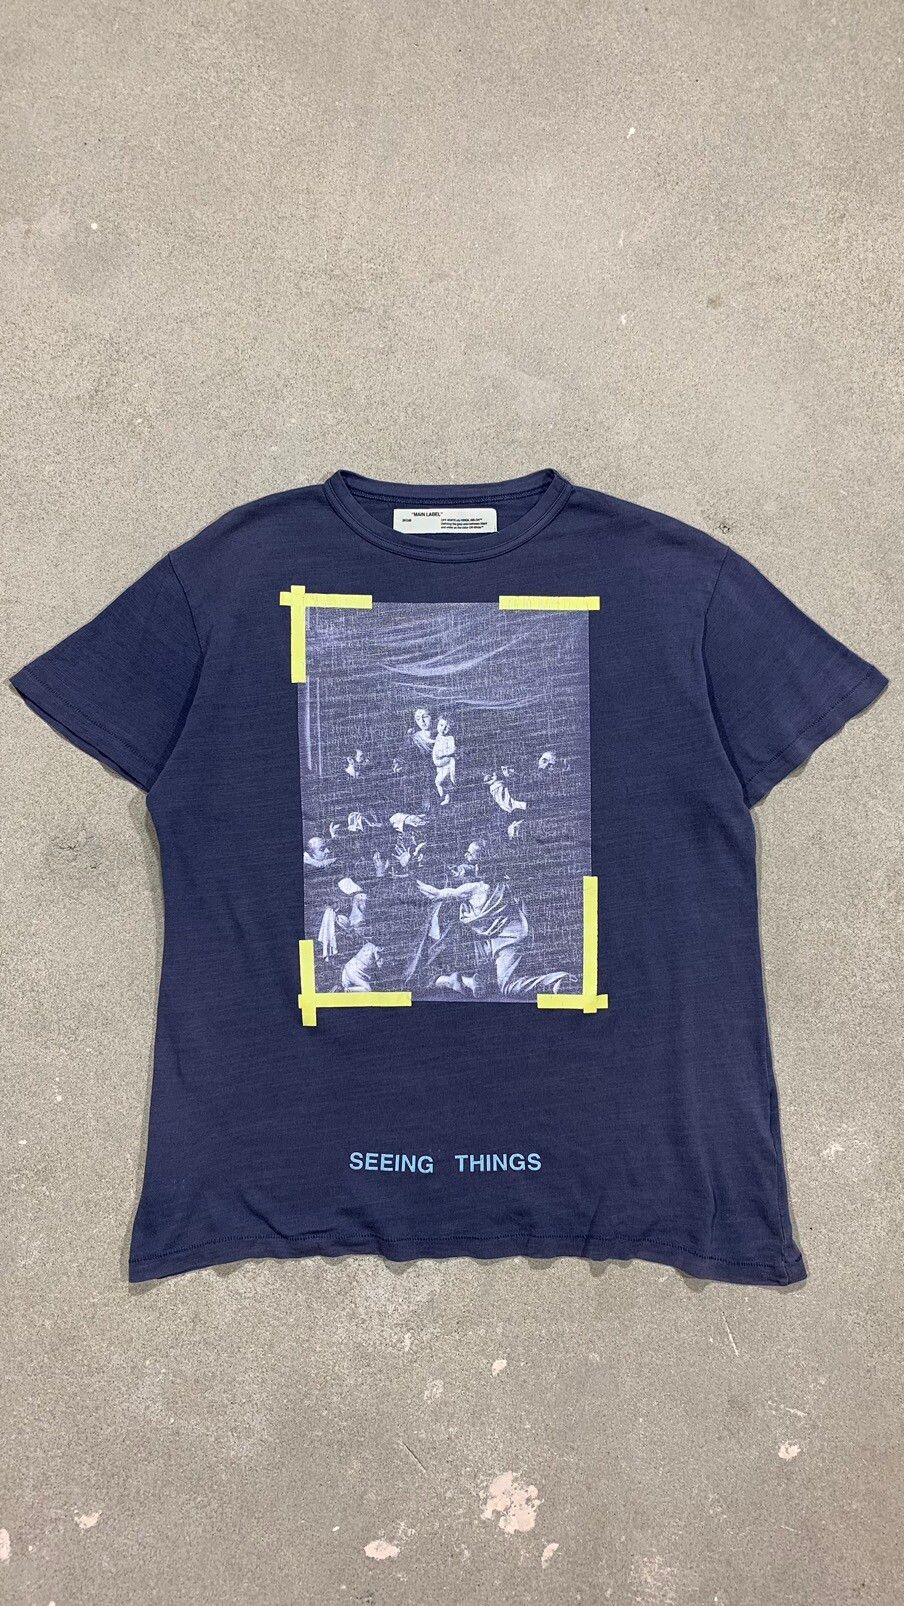 Off-White Off-white T-shirt seeing things Caravaggio | Grailed